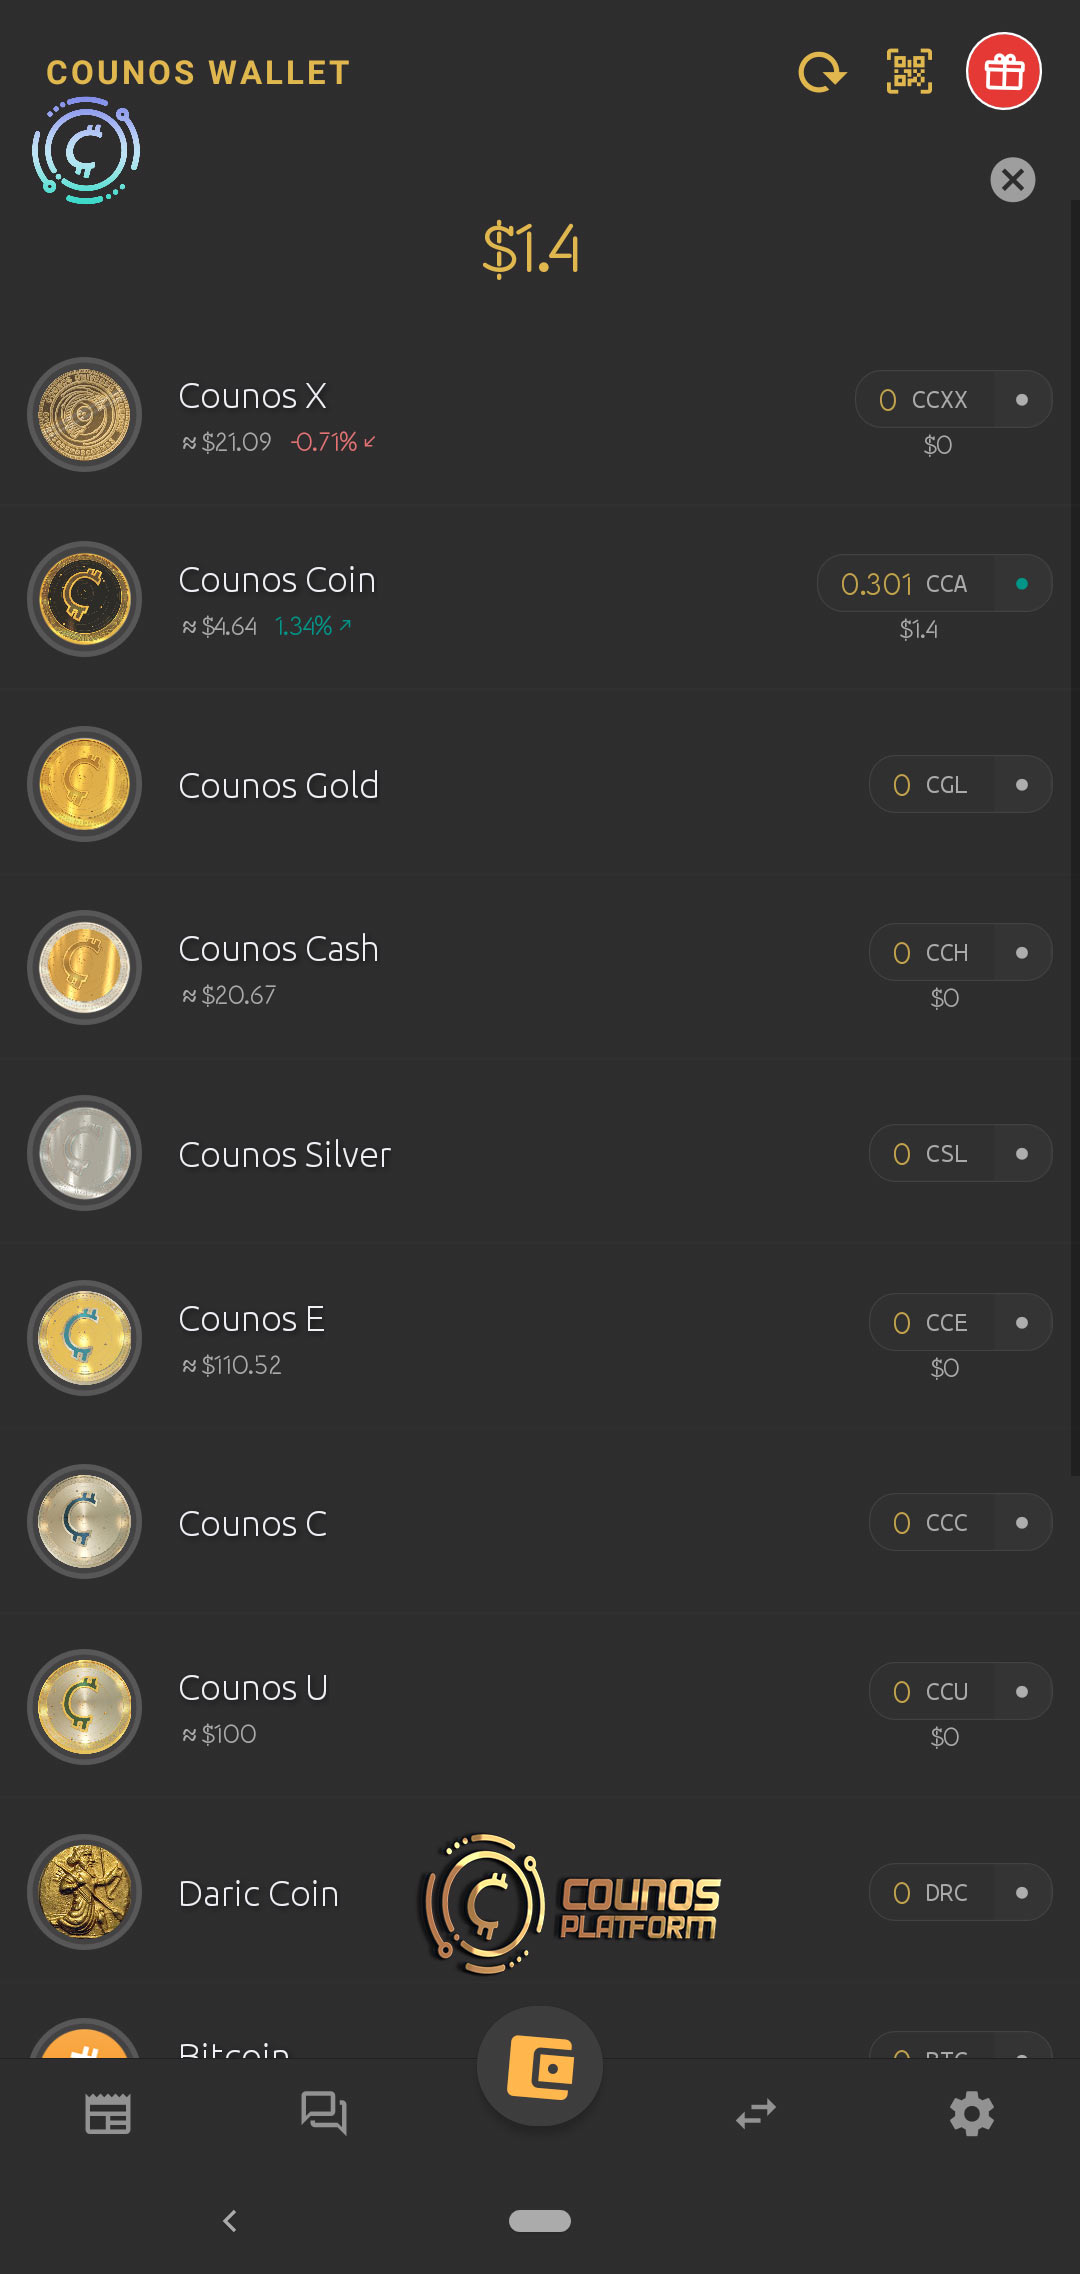 this main button will take you to the main page of the Counos         Mobile Wallet 1.9.0 in which you can see the list of all cryptocurrencies and also the balance for each coin and all the total balance in U.S. dollar